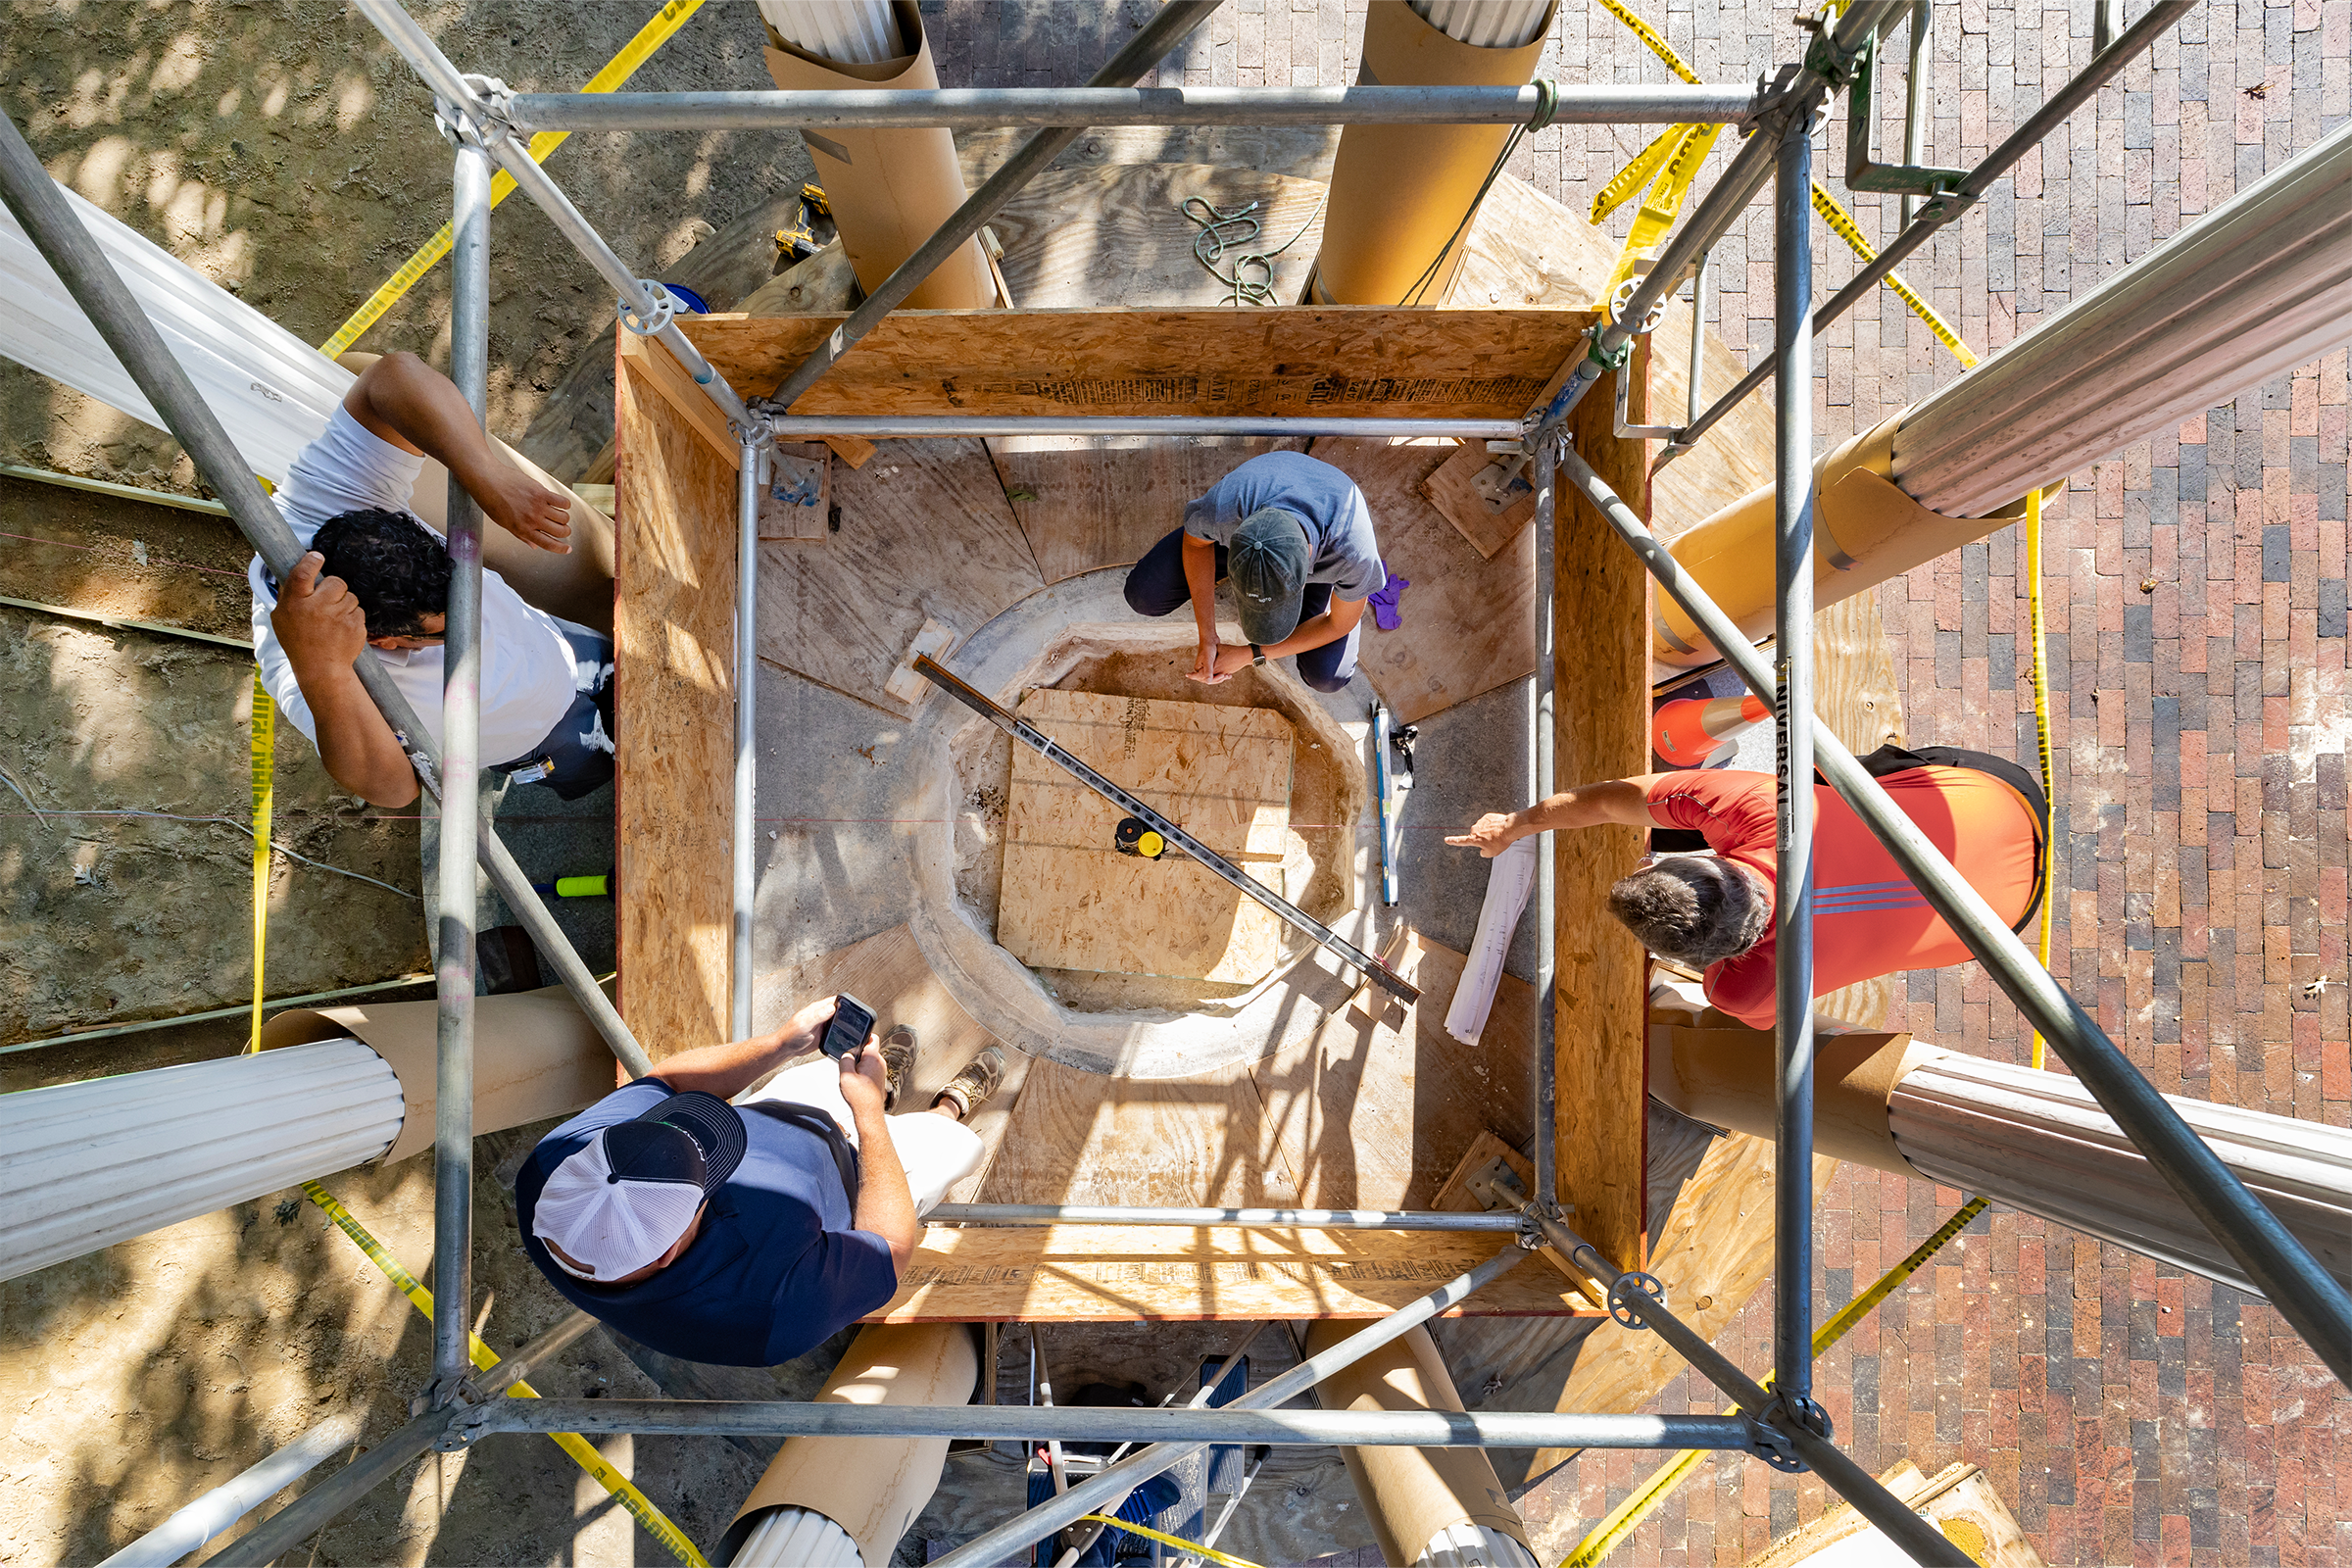 An overhead view of workers having a meeting in the interior of the Old Well structure.